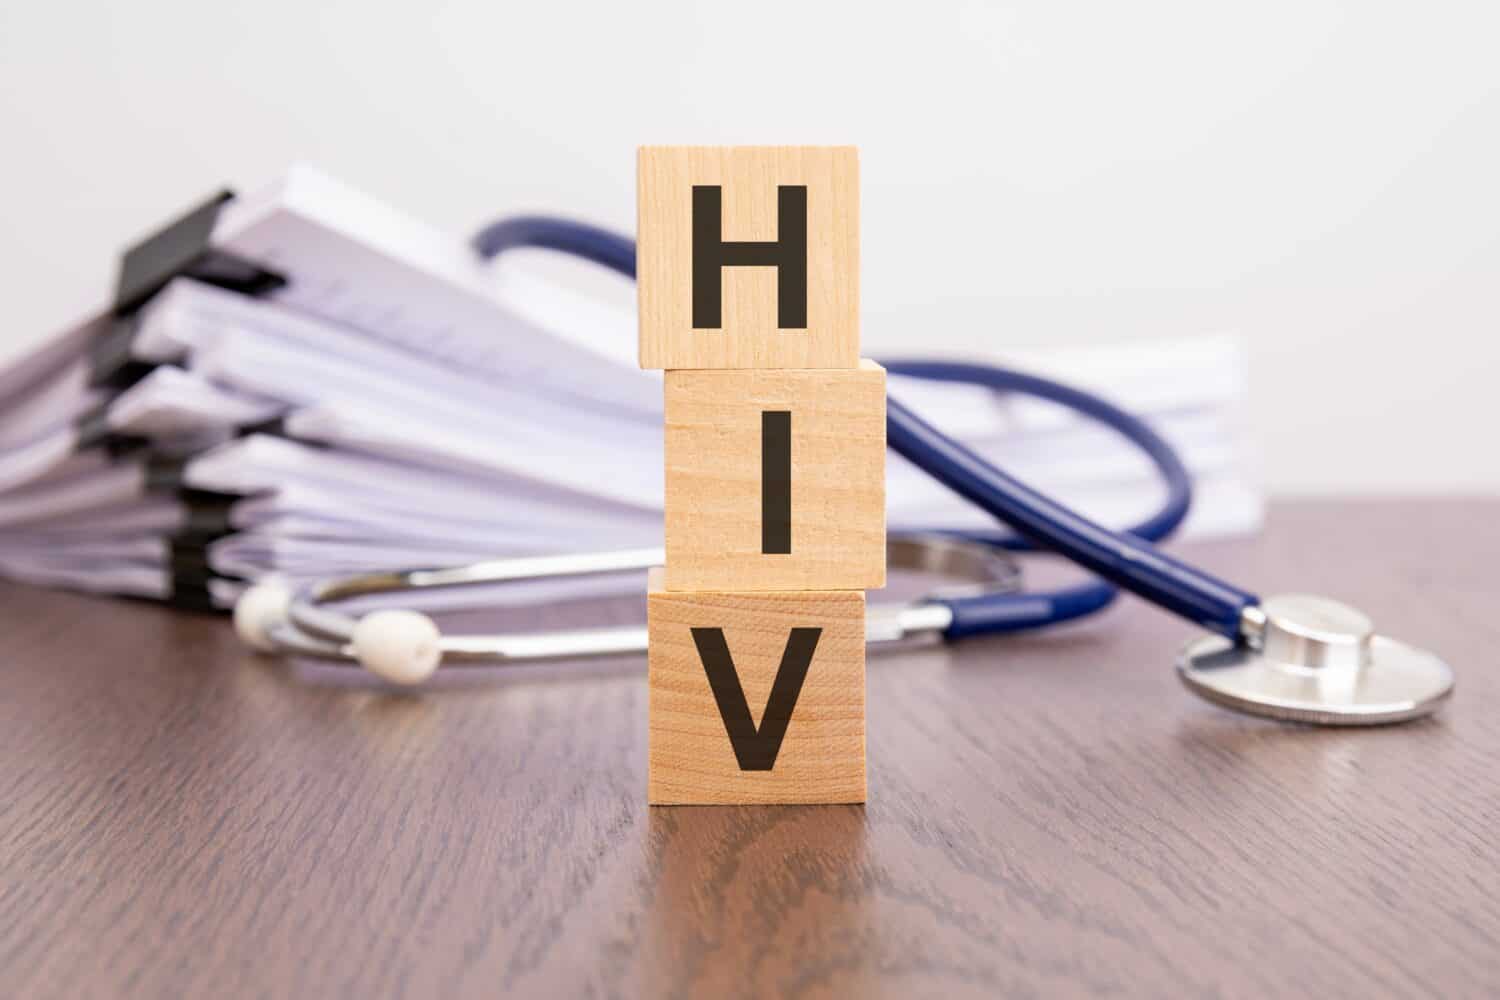 text HIV written on wooden blocks near a stethoscope on a paper background, medical concept